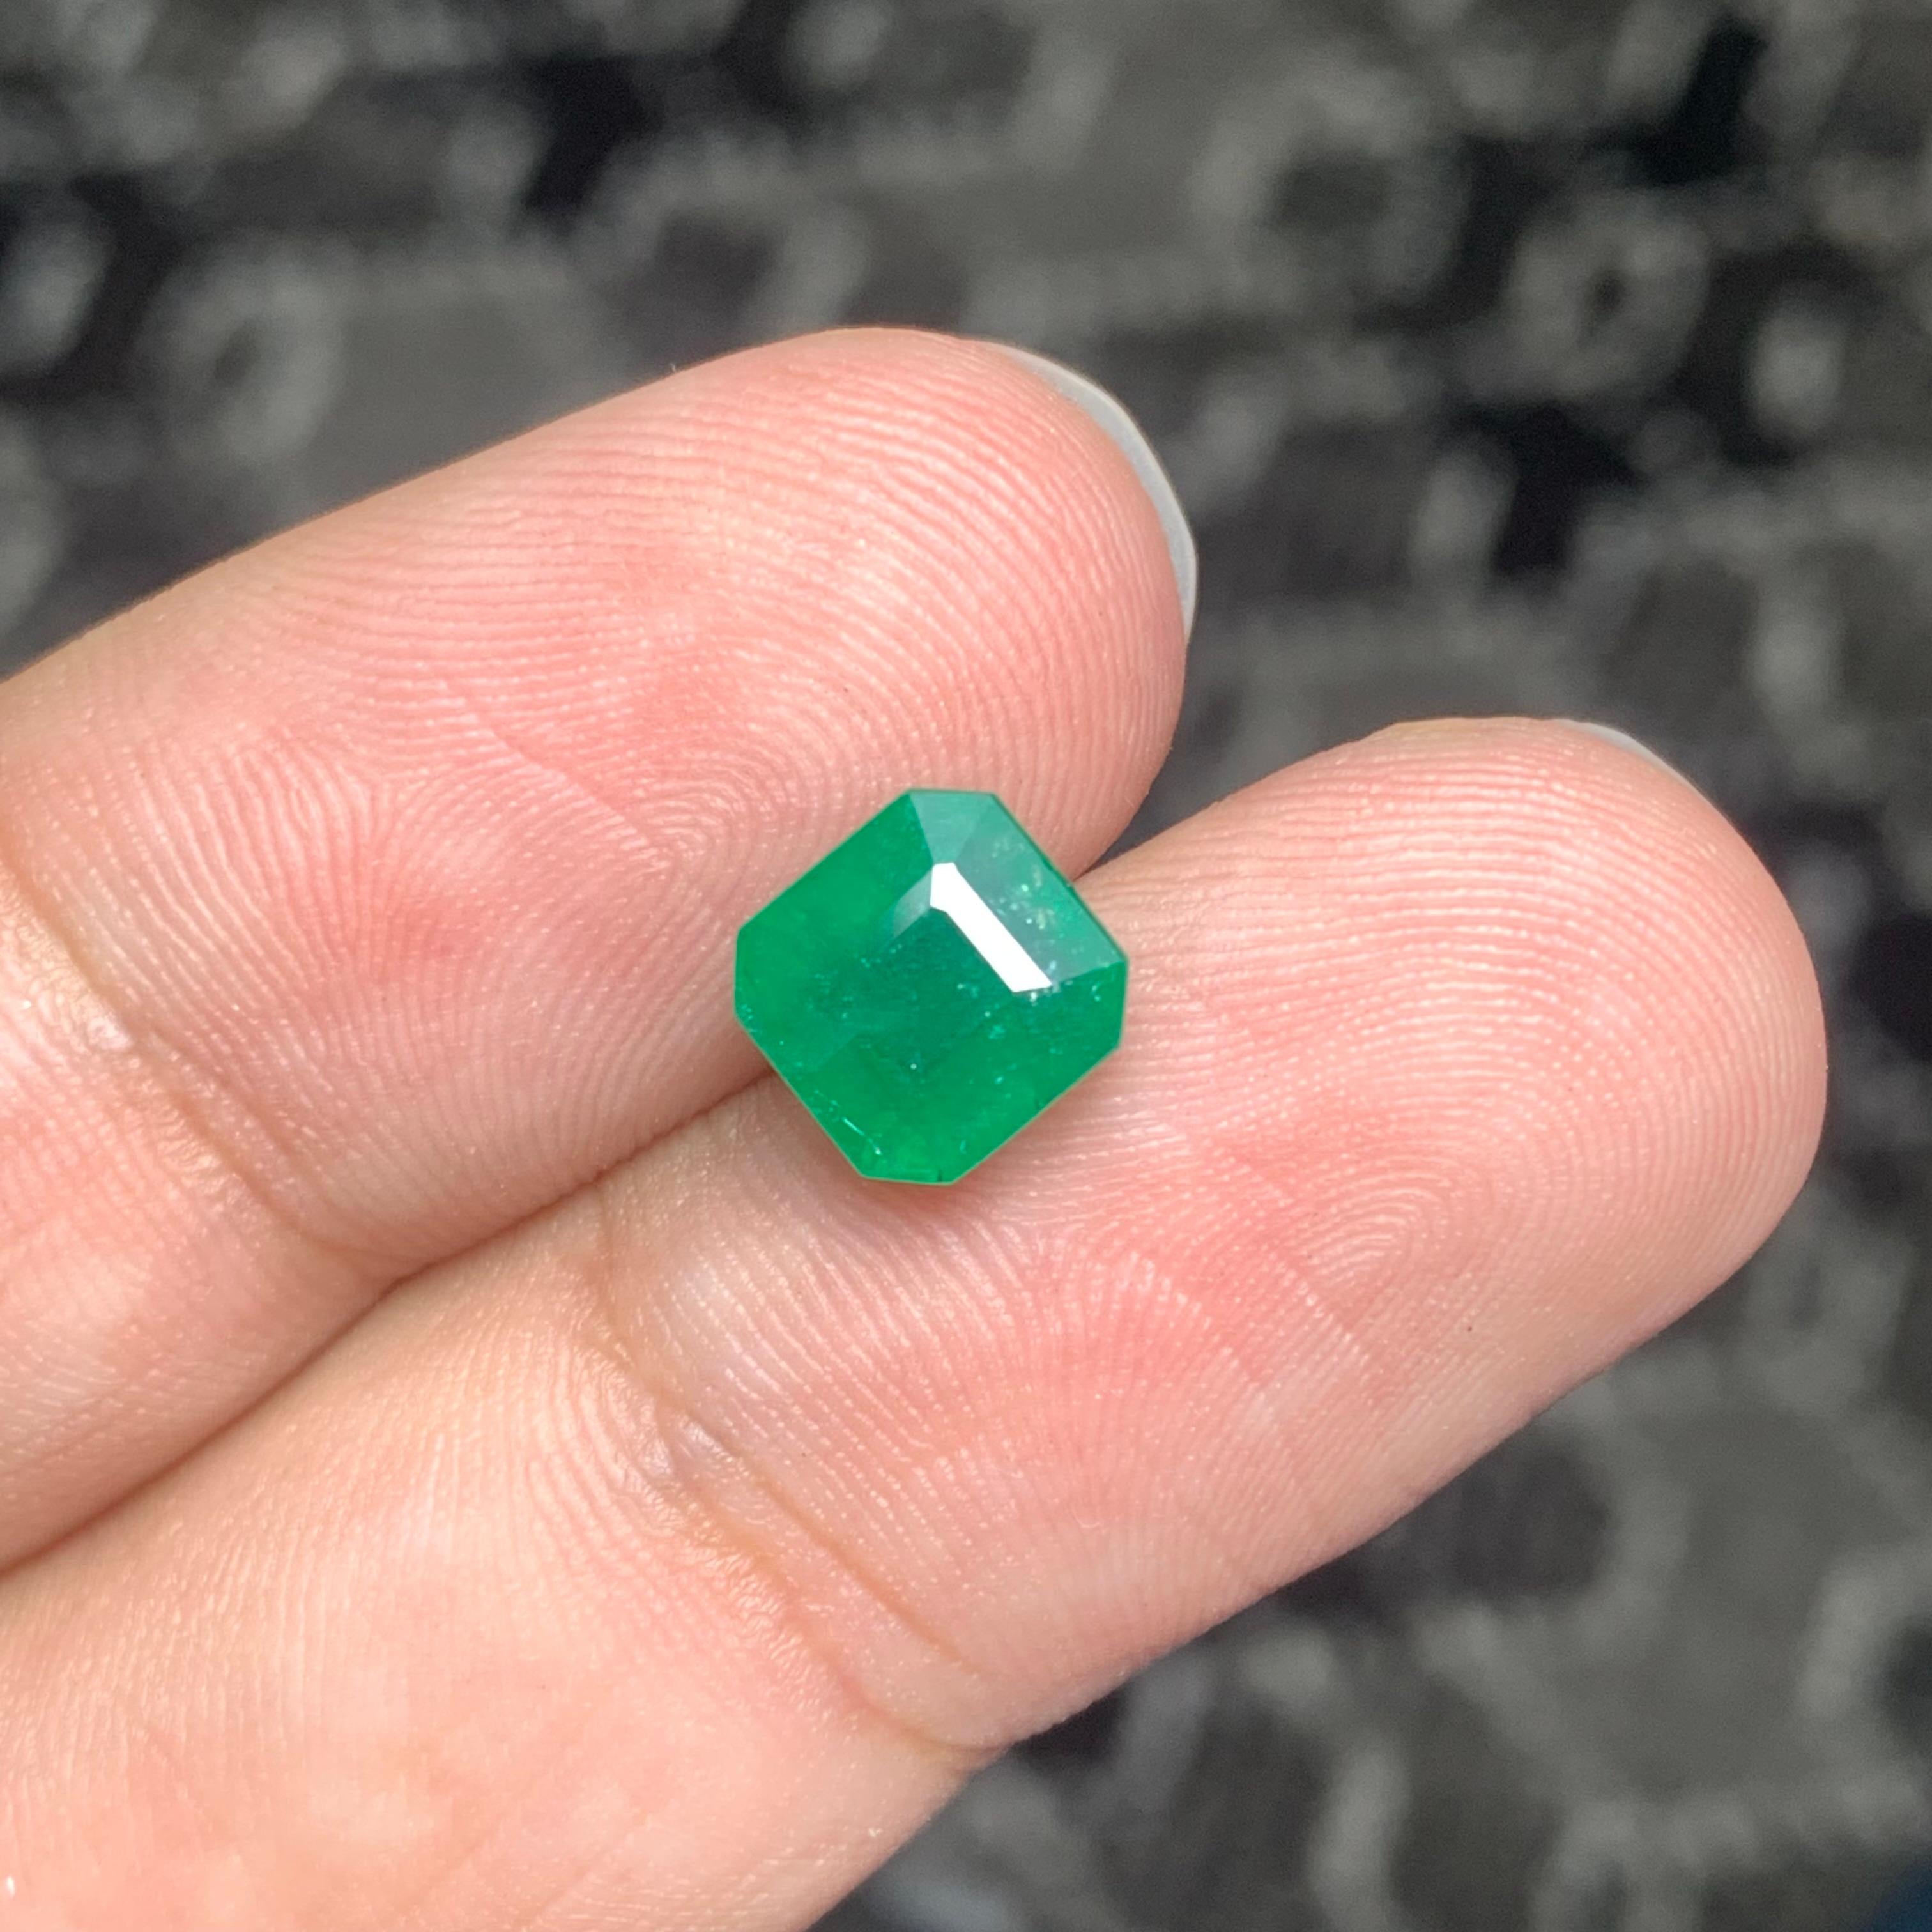 Loose Emerald 
Weight: 2.50 Carats 
Dimension: 7.4x7.2x5.8 Mm
Origin: Brazil
Certificate: On Customer Demand 
Shape: Octagon
Treatment: Non
Emeralds from Zambia are renowned for their stunning green hues and exceptional quality. Zambia is one of the